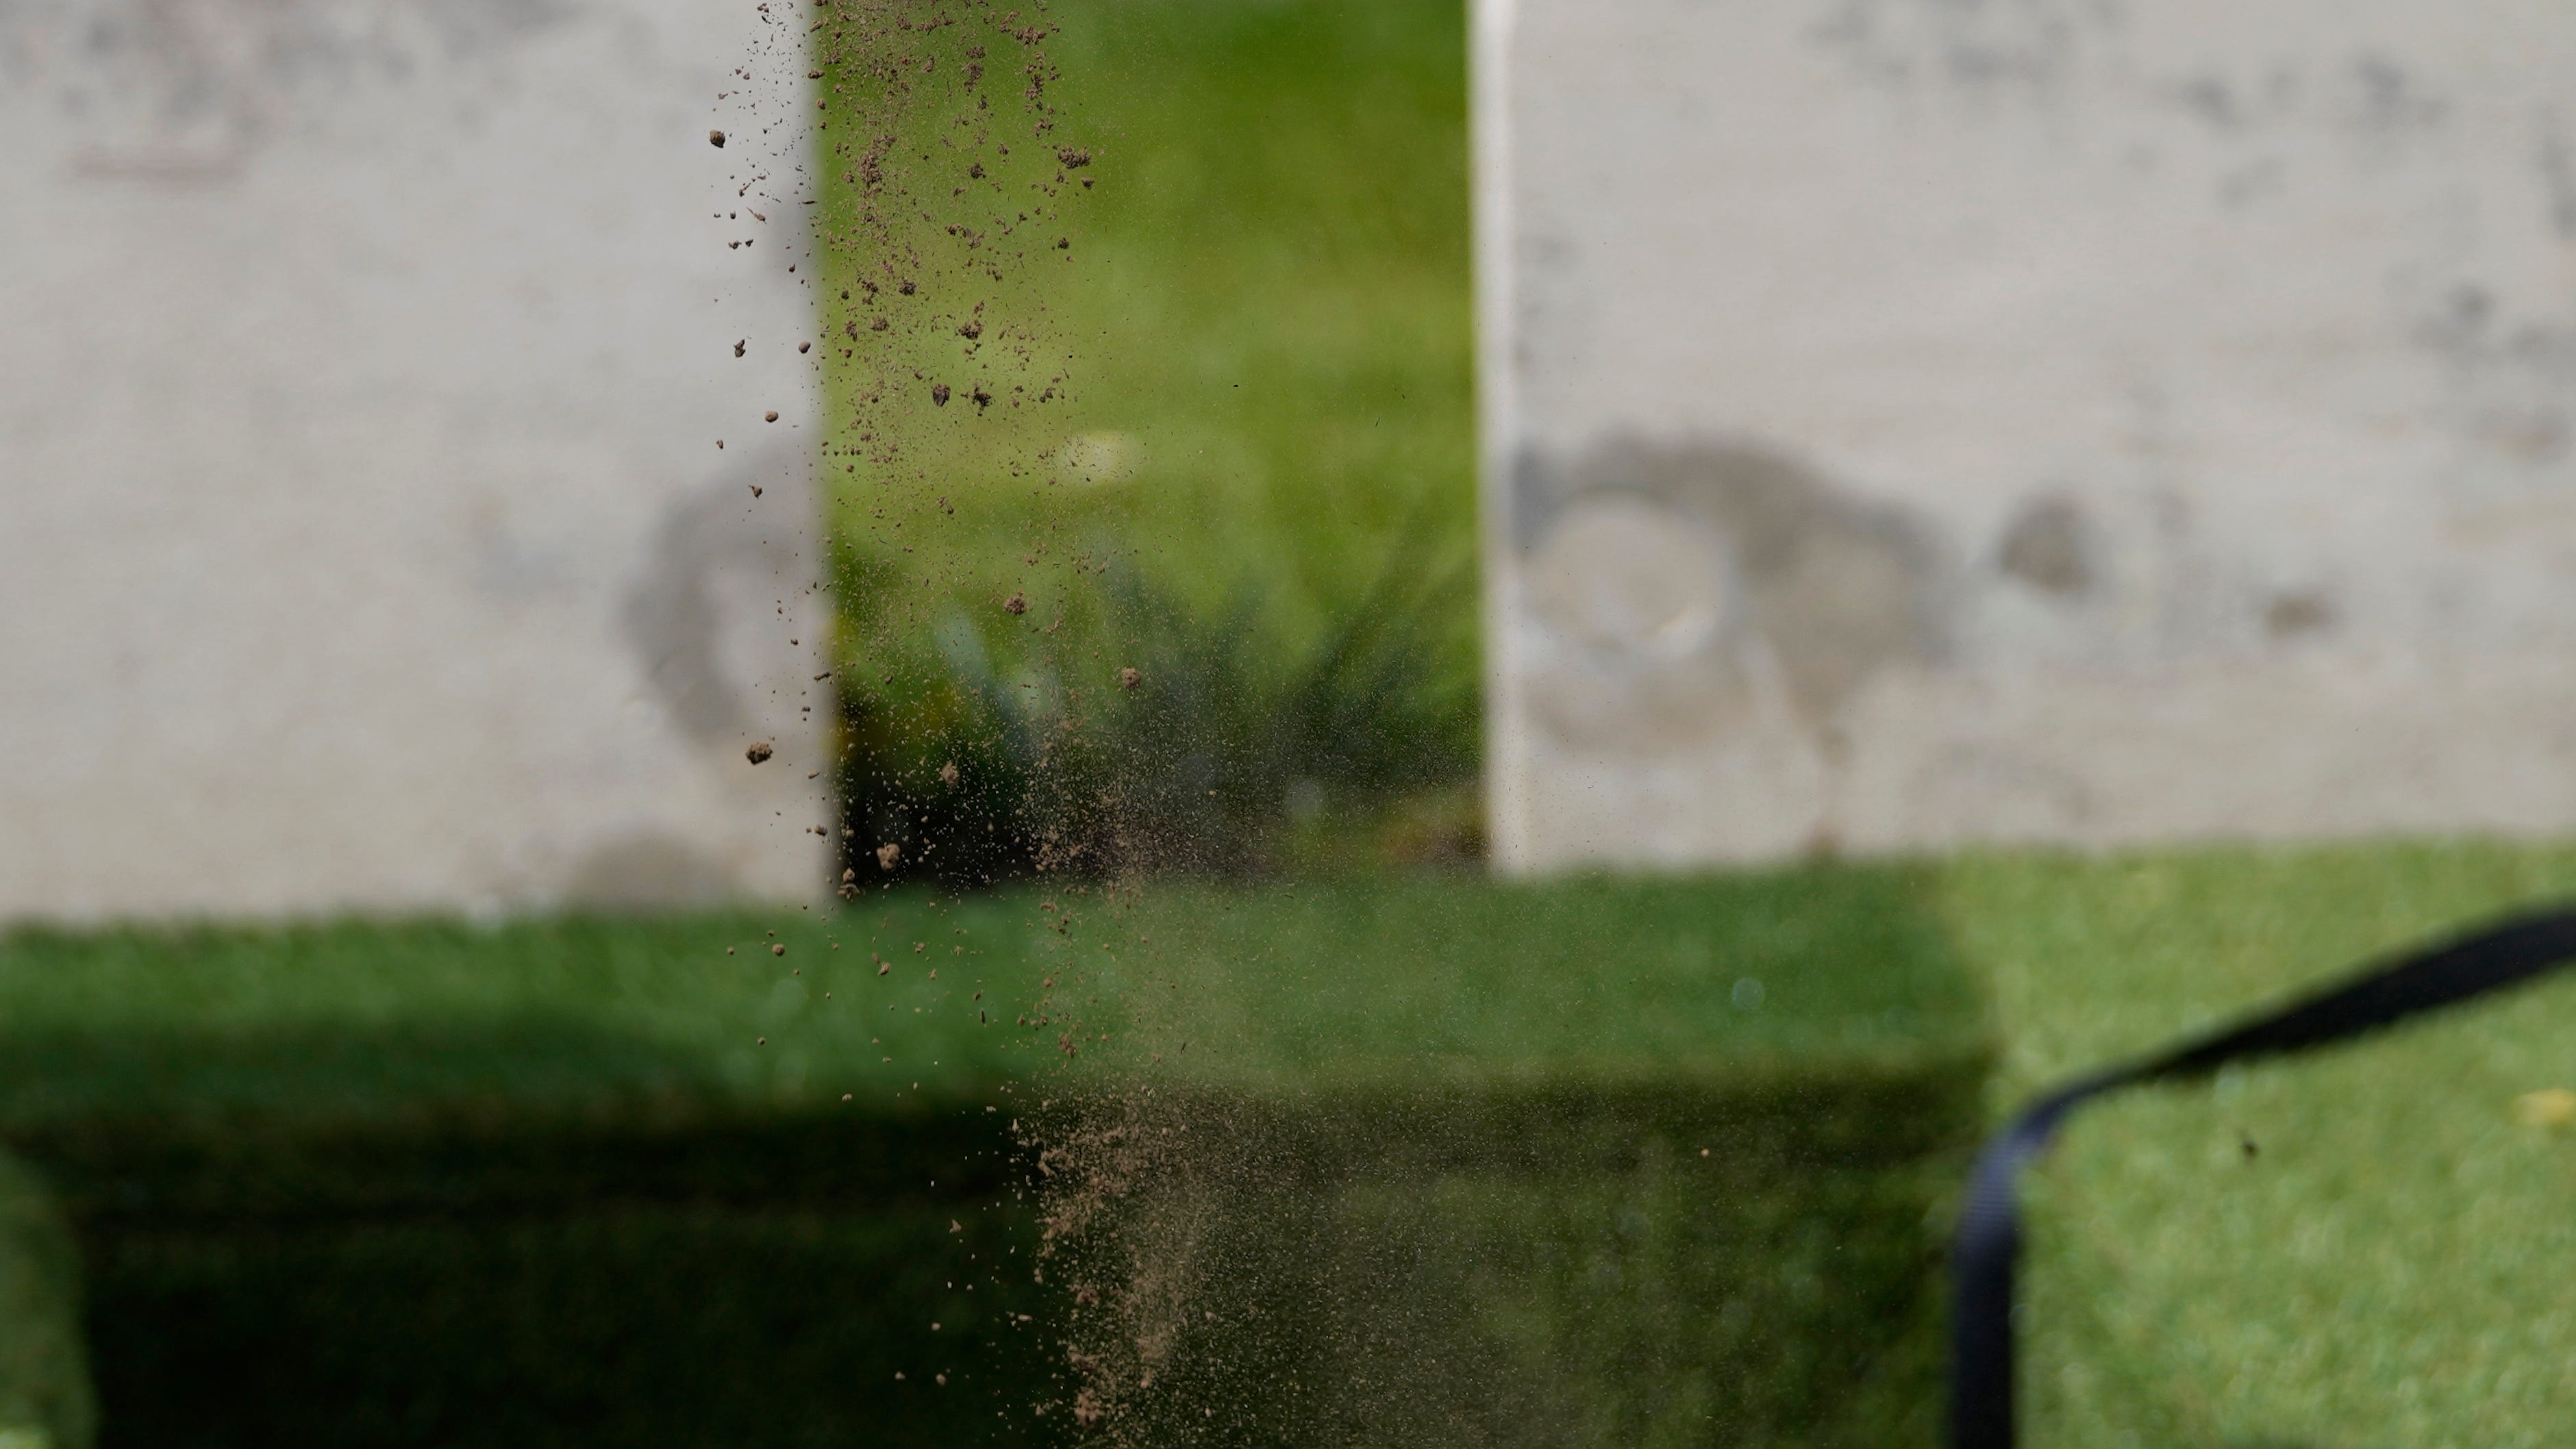 A relative of World War I soldier Private Robert Kenneth Malcolm sprinkles earth on the grave during a burial ceremony at the Commonwealth War Graves Commission's Bedford House Cemetery in Ypres, Belgium, Wednesday, May 10, 2023. Private Malcolm, from Stockton-on-Tees, County Durham, United Kingdom, was a stretcher bearer and went missing at the age of 23 in 1917. His remains were recovered in 2019.